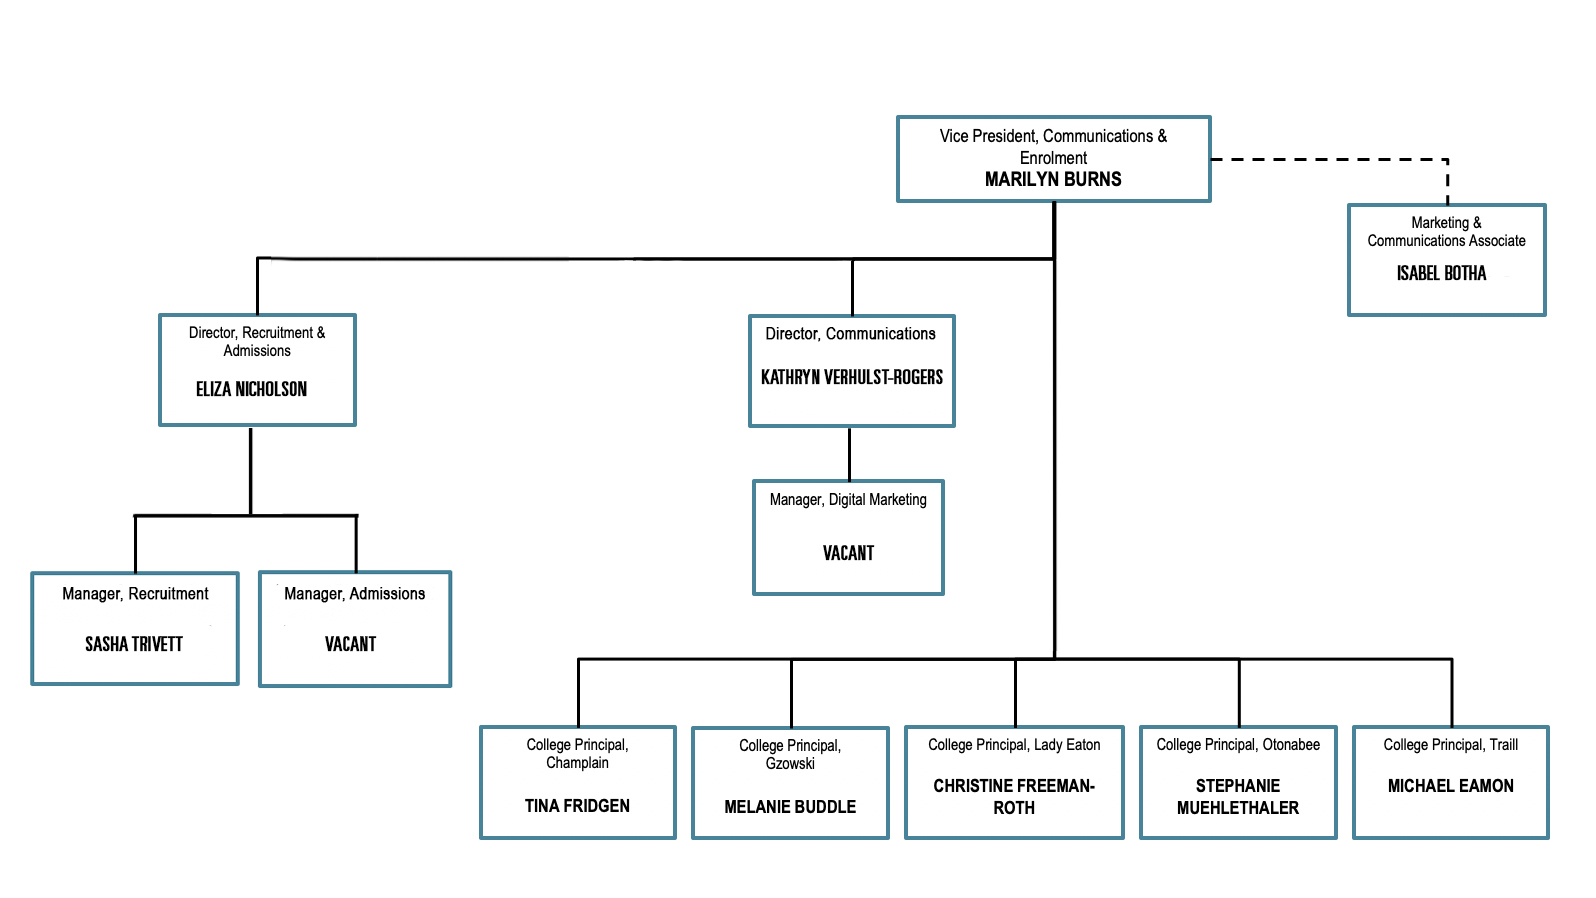 Office of the Vice President, Communications & Enrolment organizational chart